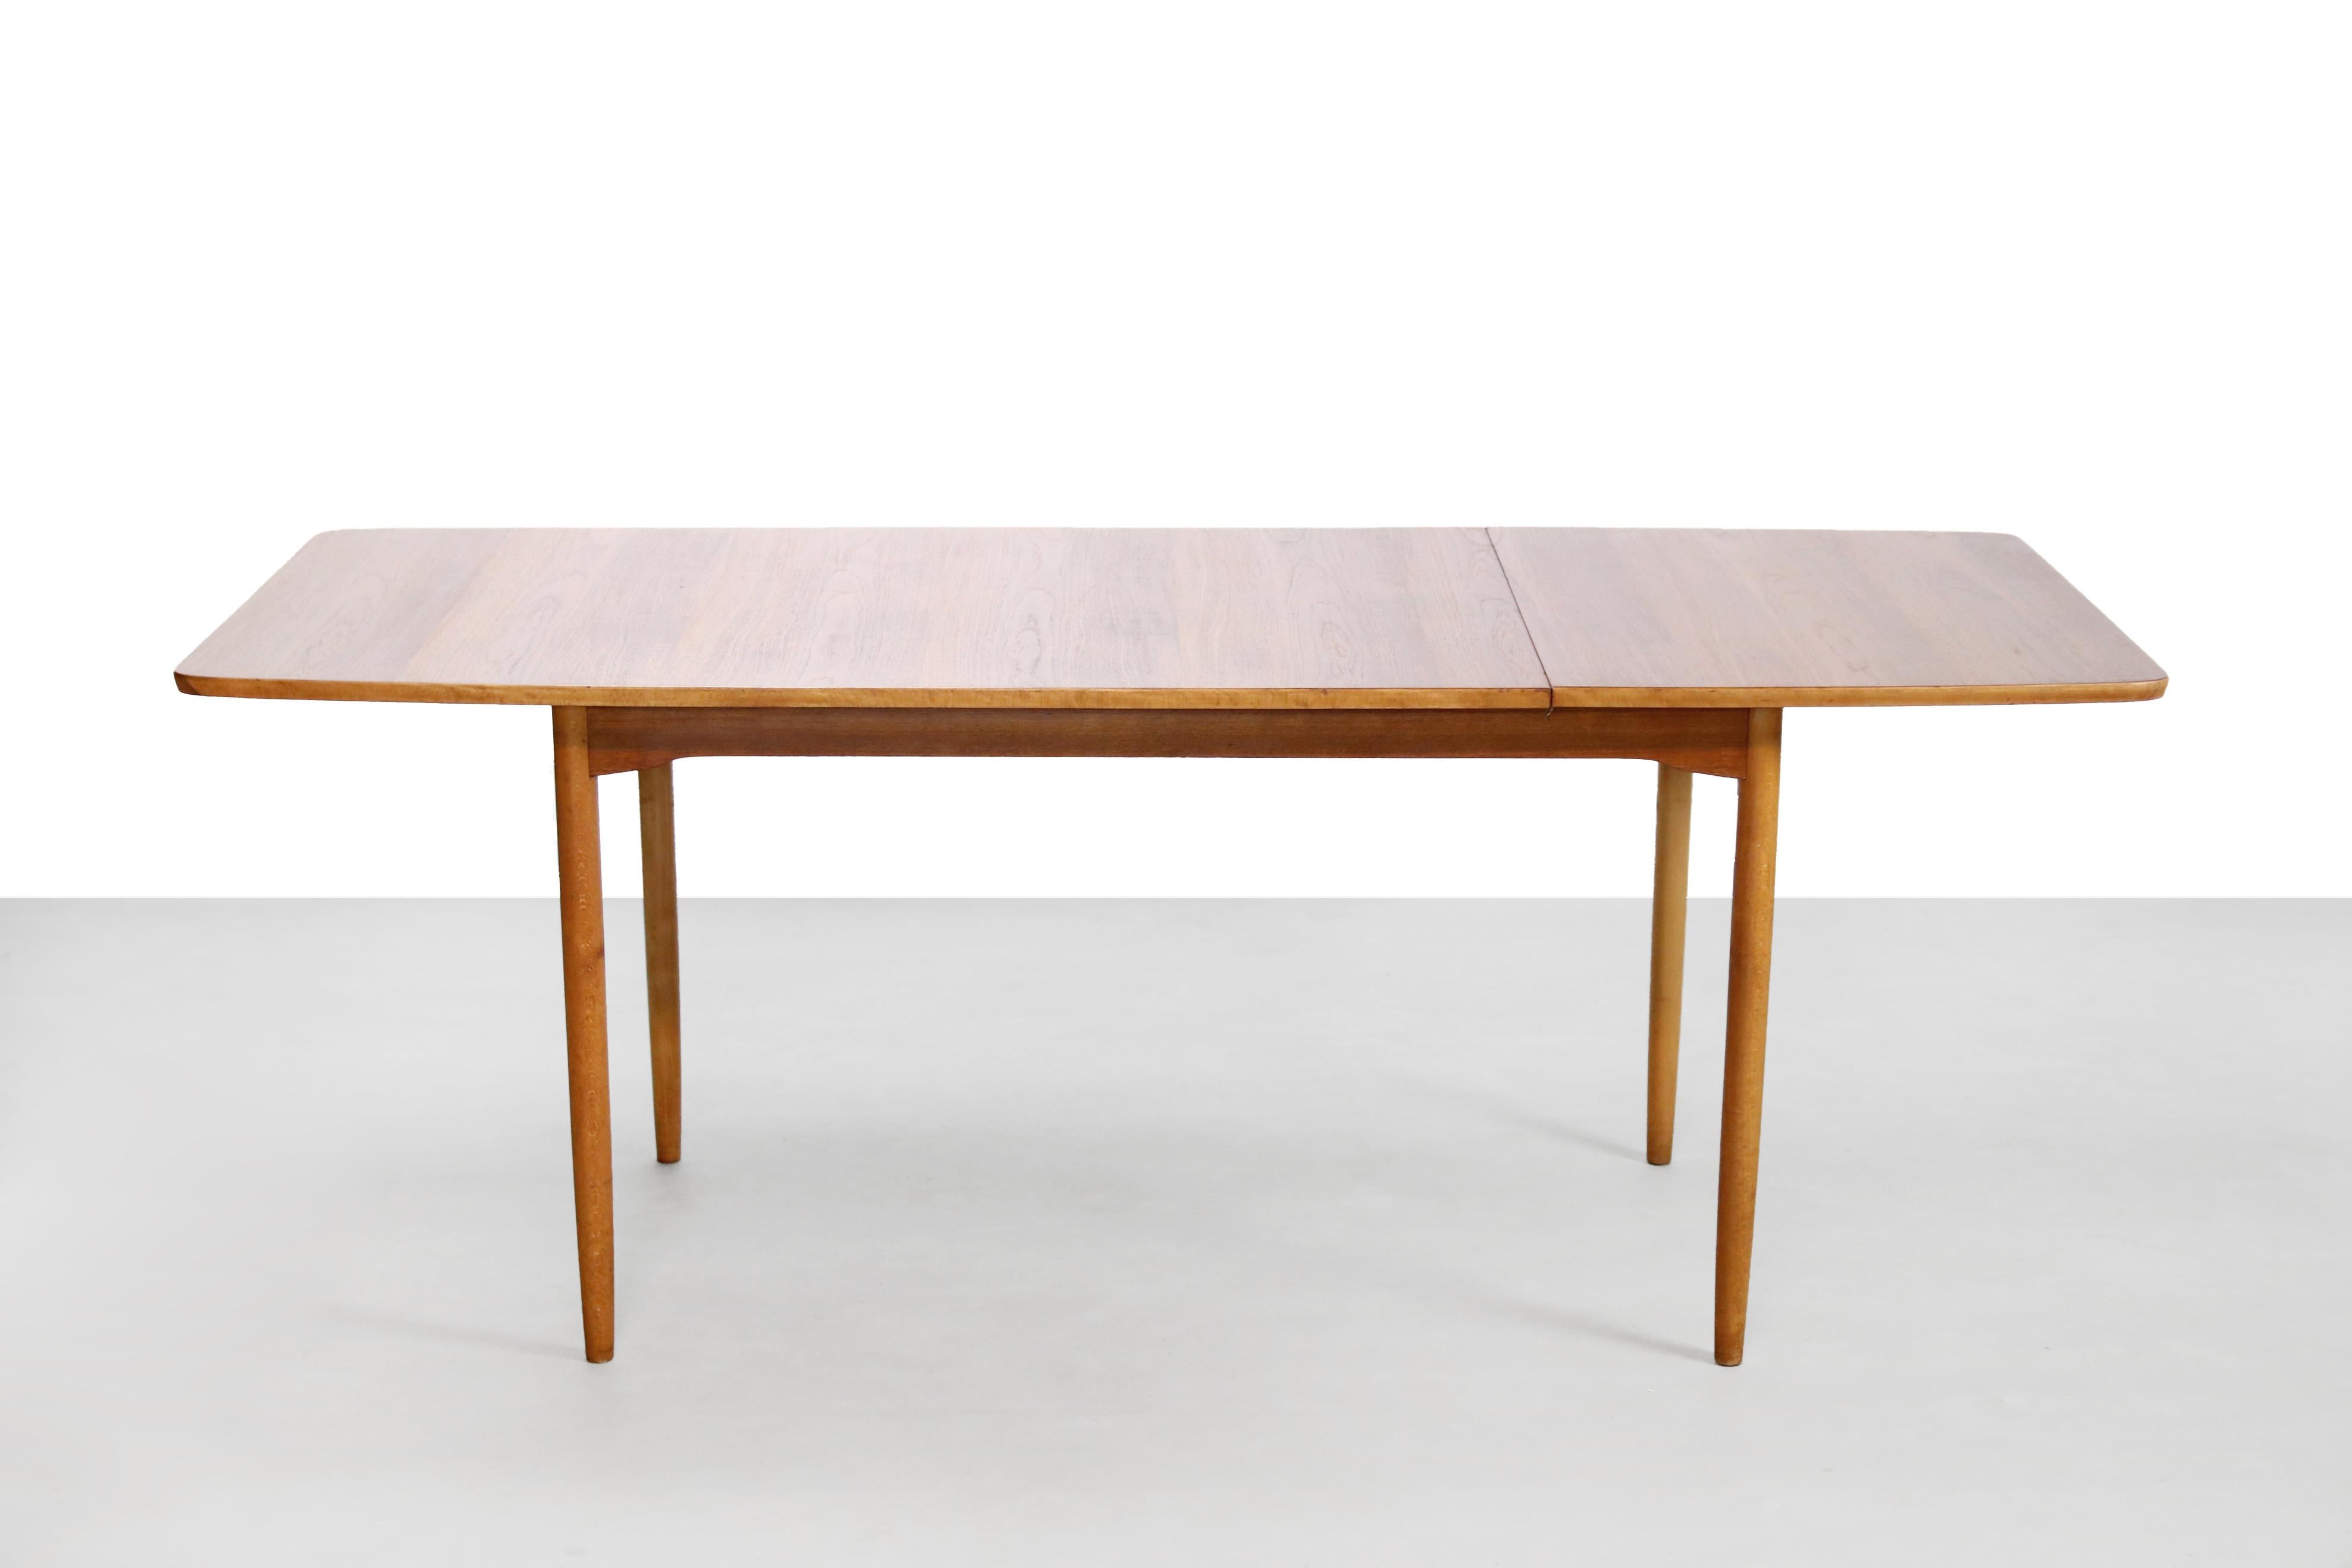 Beautiful and rare teak wooden table with beech legs which can be extended by a drop-leaf table top. By folding the top up and sliding it all the way to the left, the table can be easily extended. This table is marked the same (with die-cut numbers)